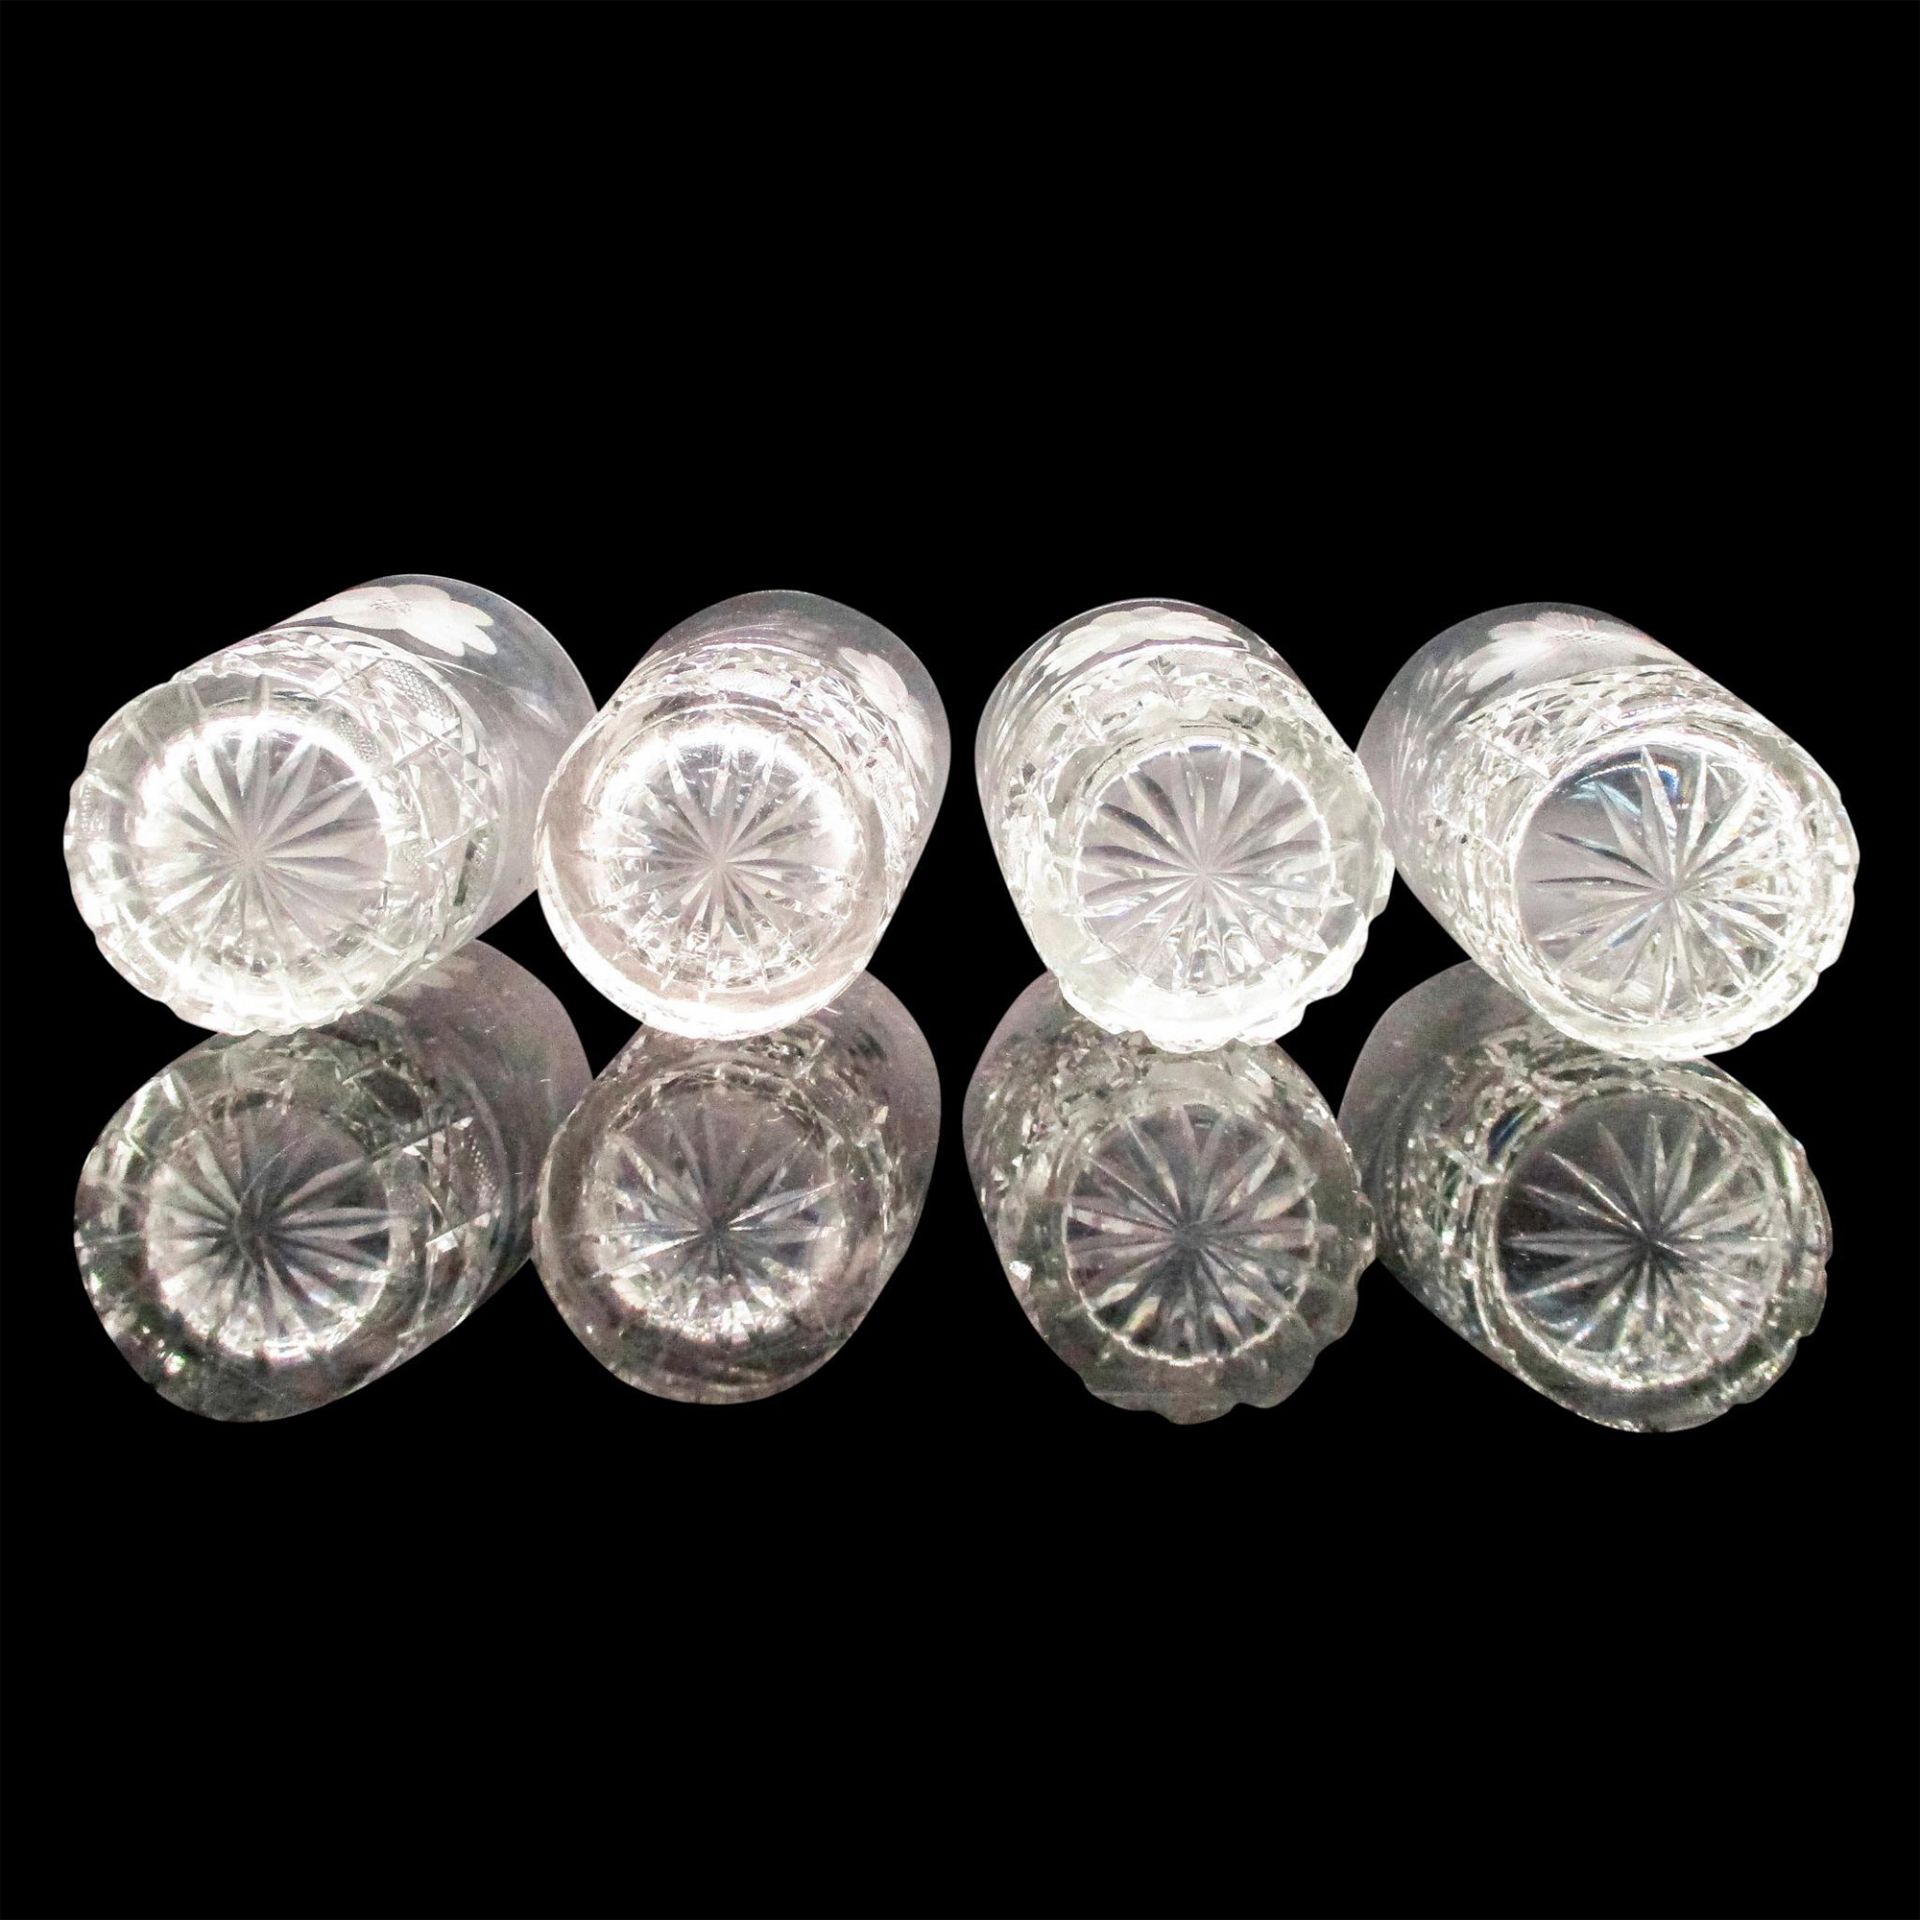 8pc Vintage Crystal Etched Whiskey Glasses - Image 5 of 8